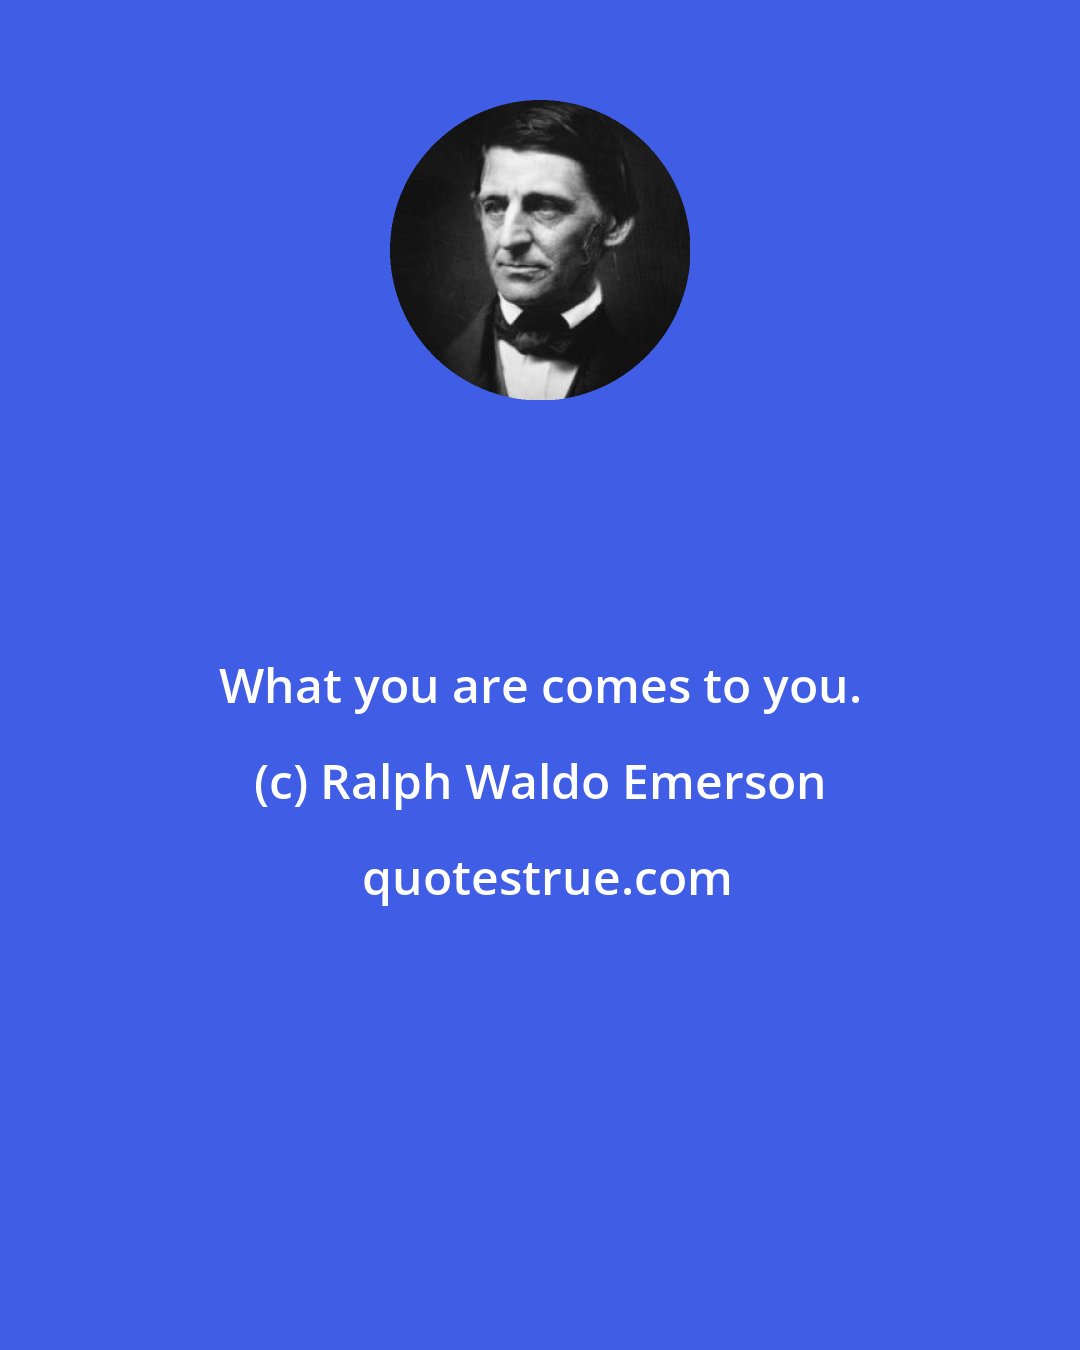 Ralph Waldo Emerson: What you are comes to you.